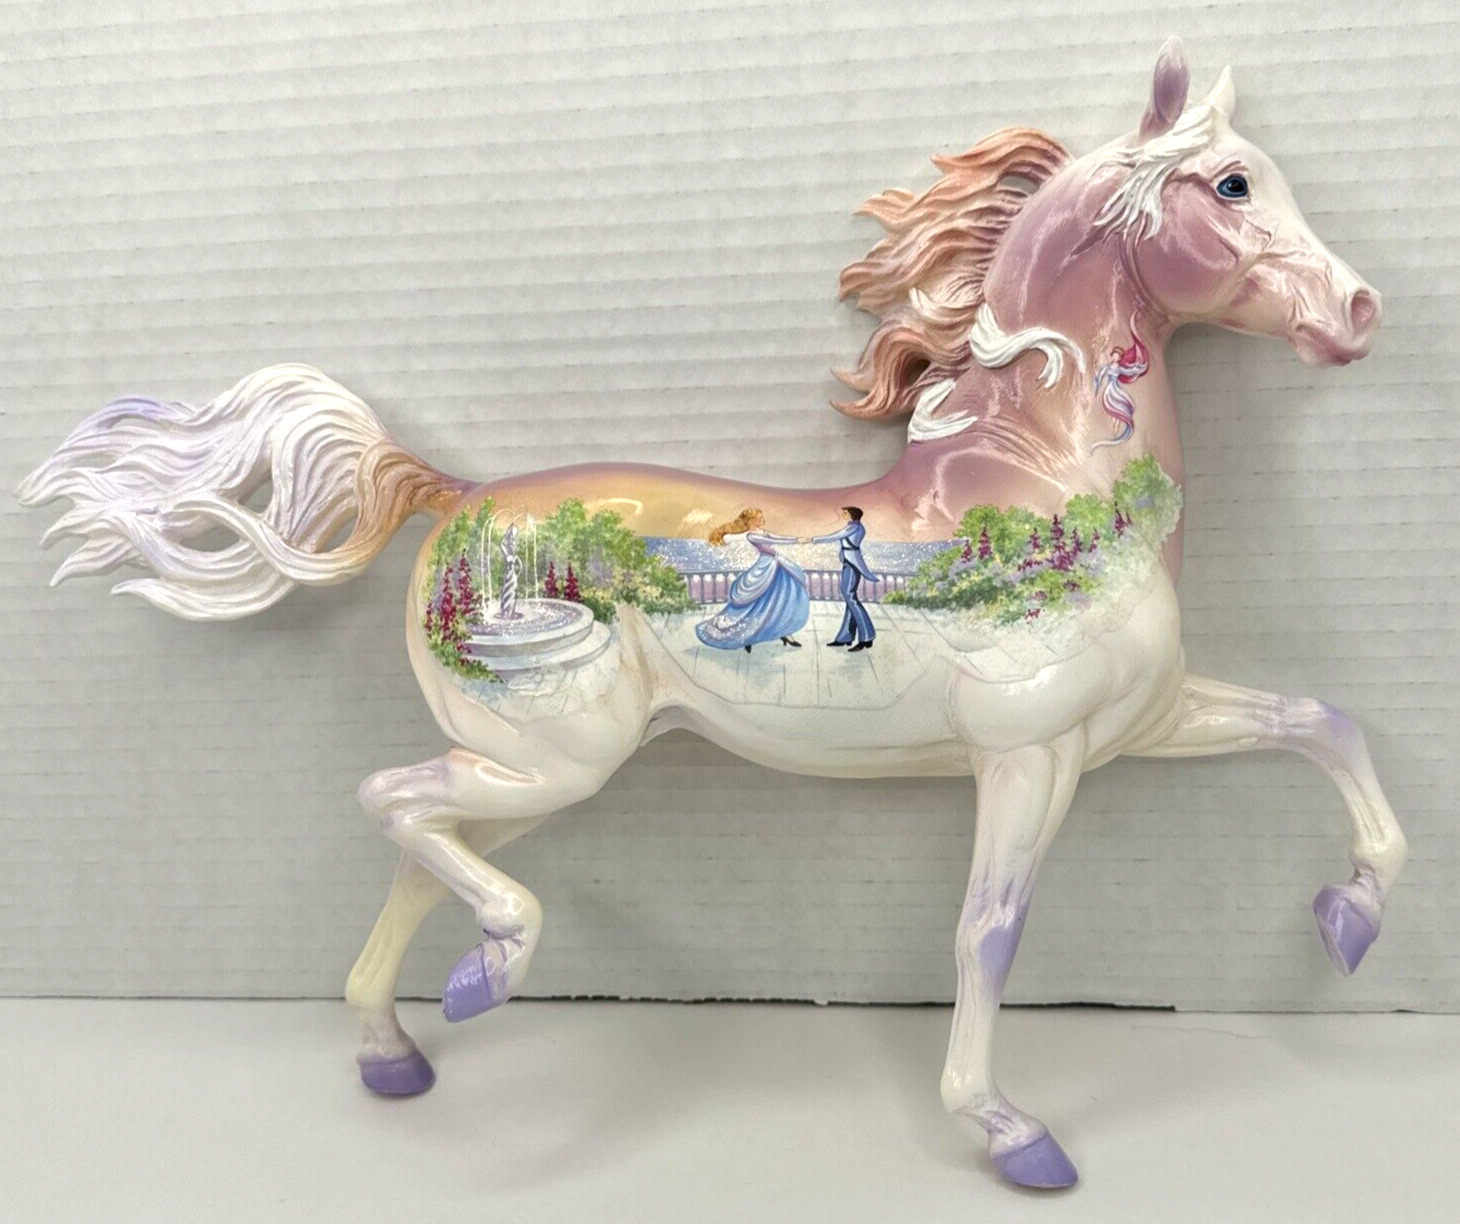 Breyer Traditional Romance Huckleberry Bey No Stand Fantasy Horse 2004 VGUC